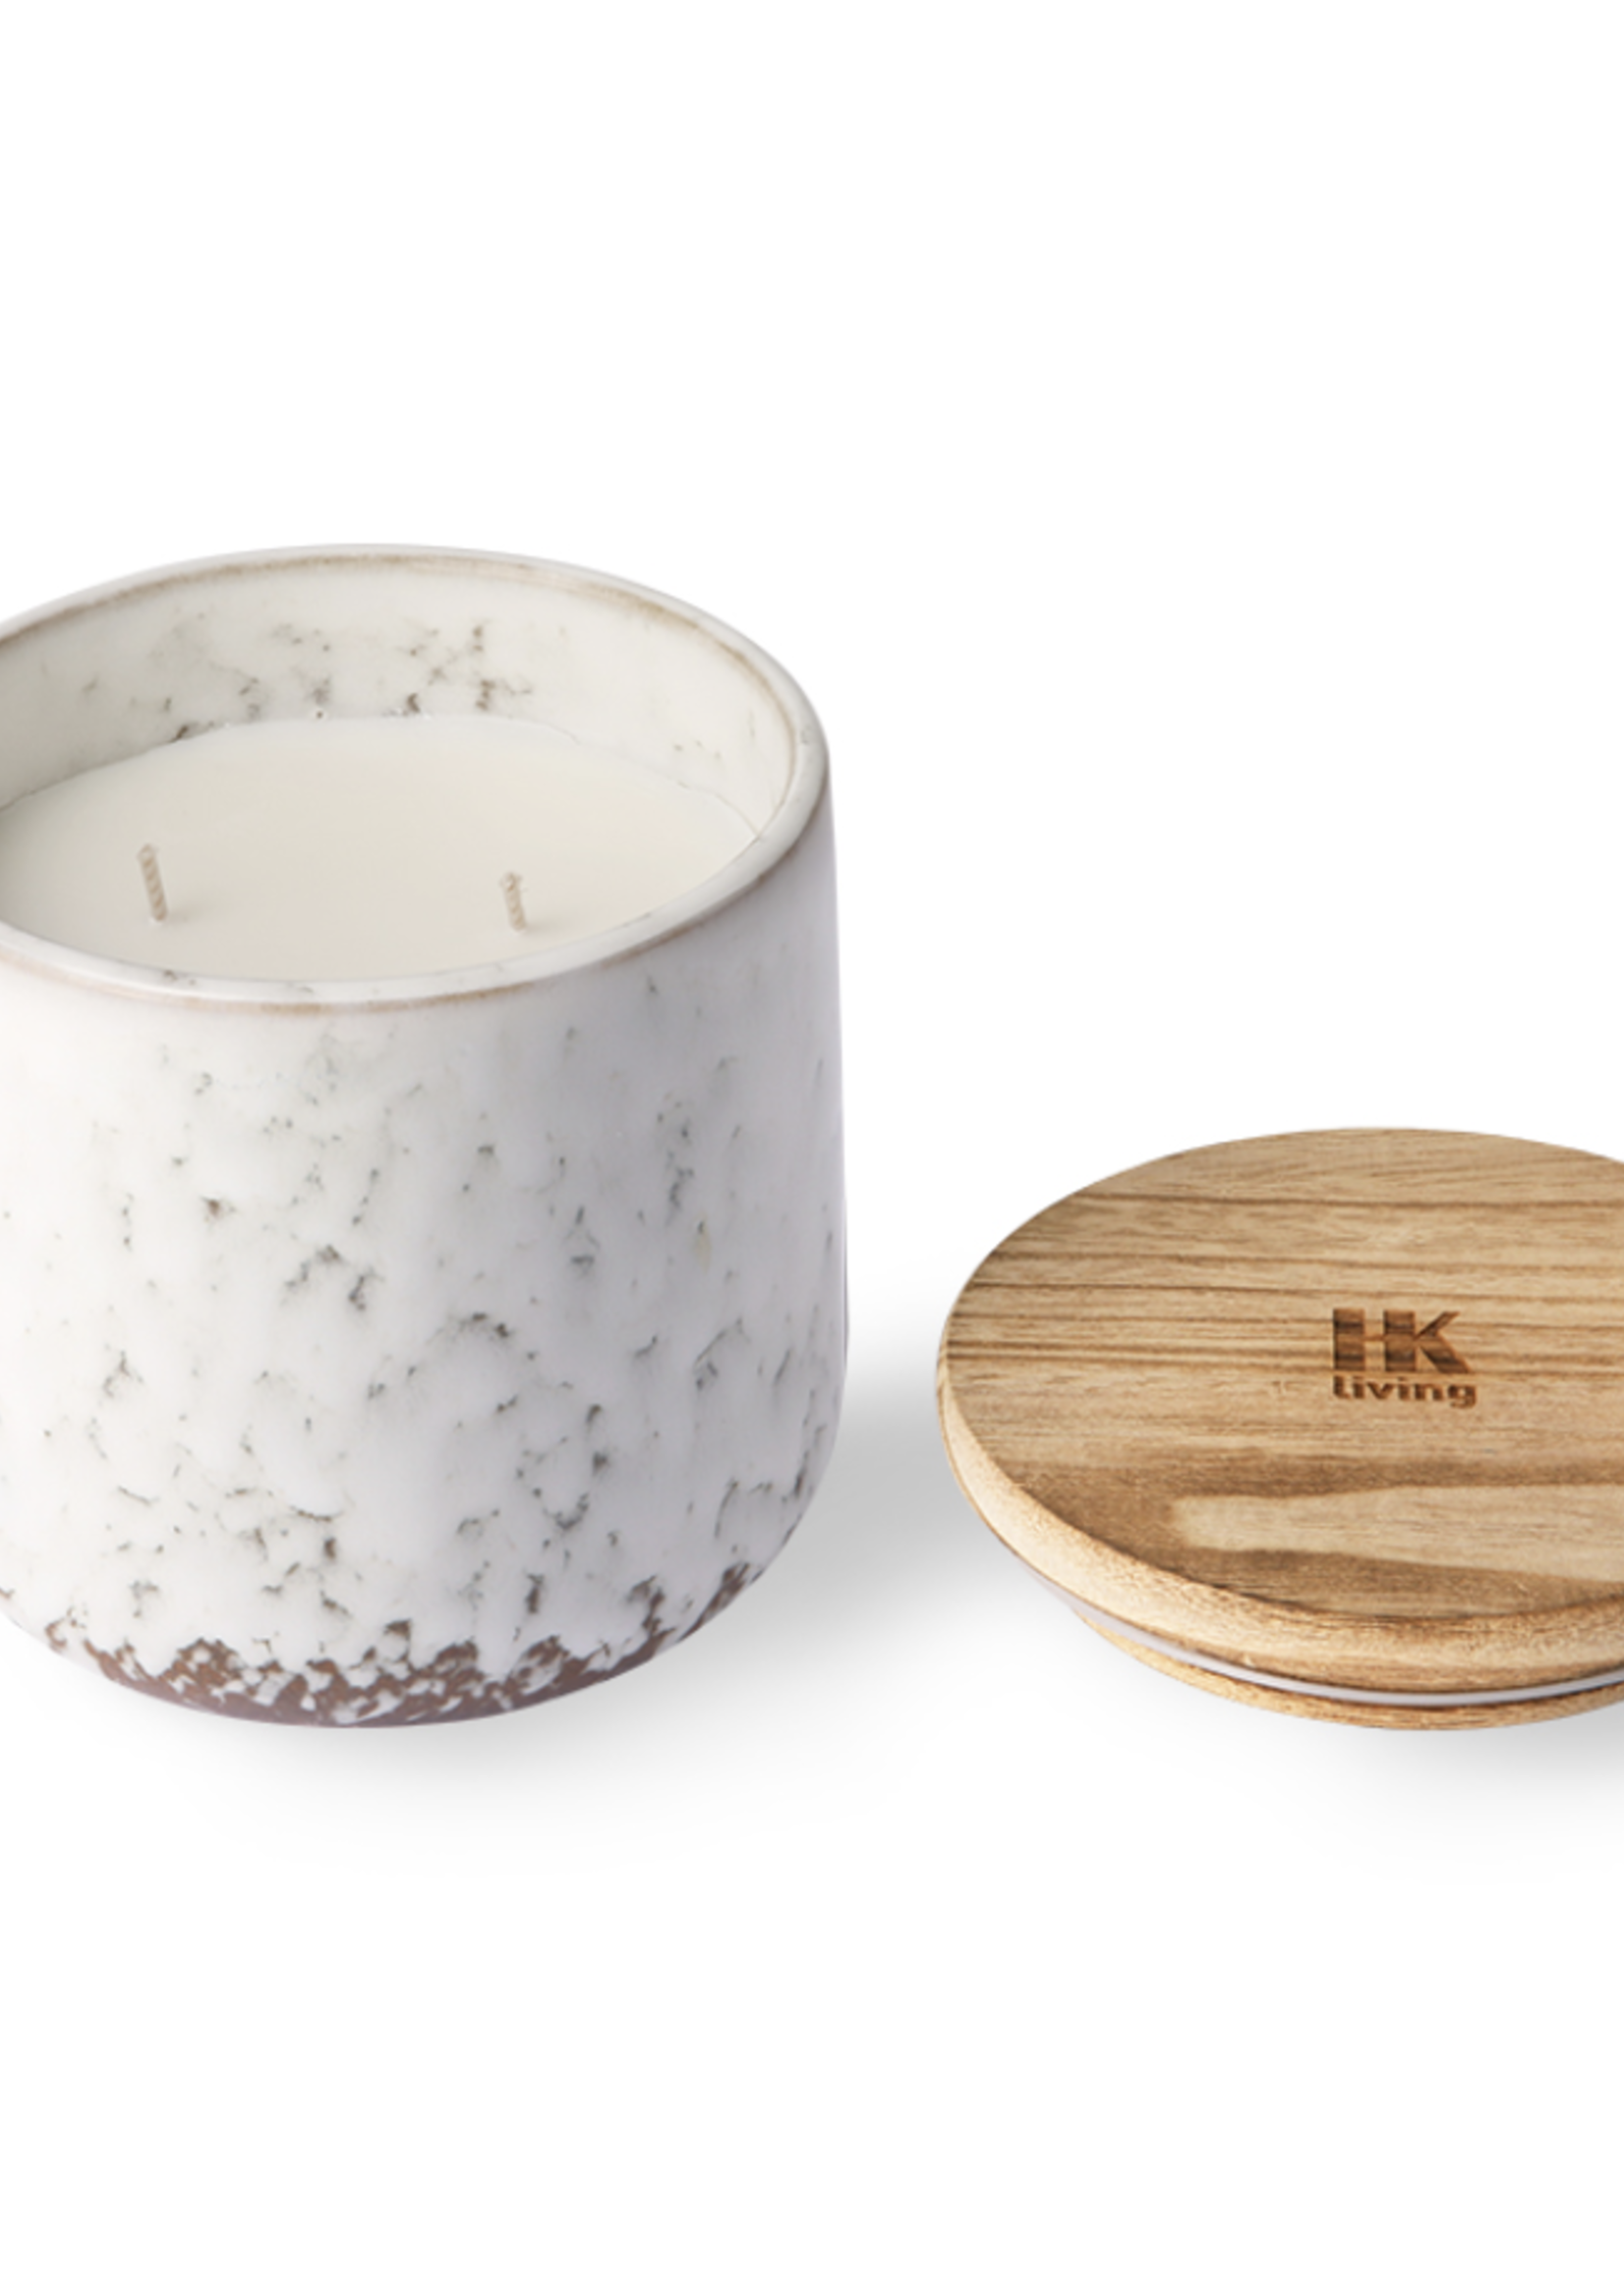 HK LIVING Ceramic scented candle northern soul